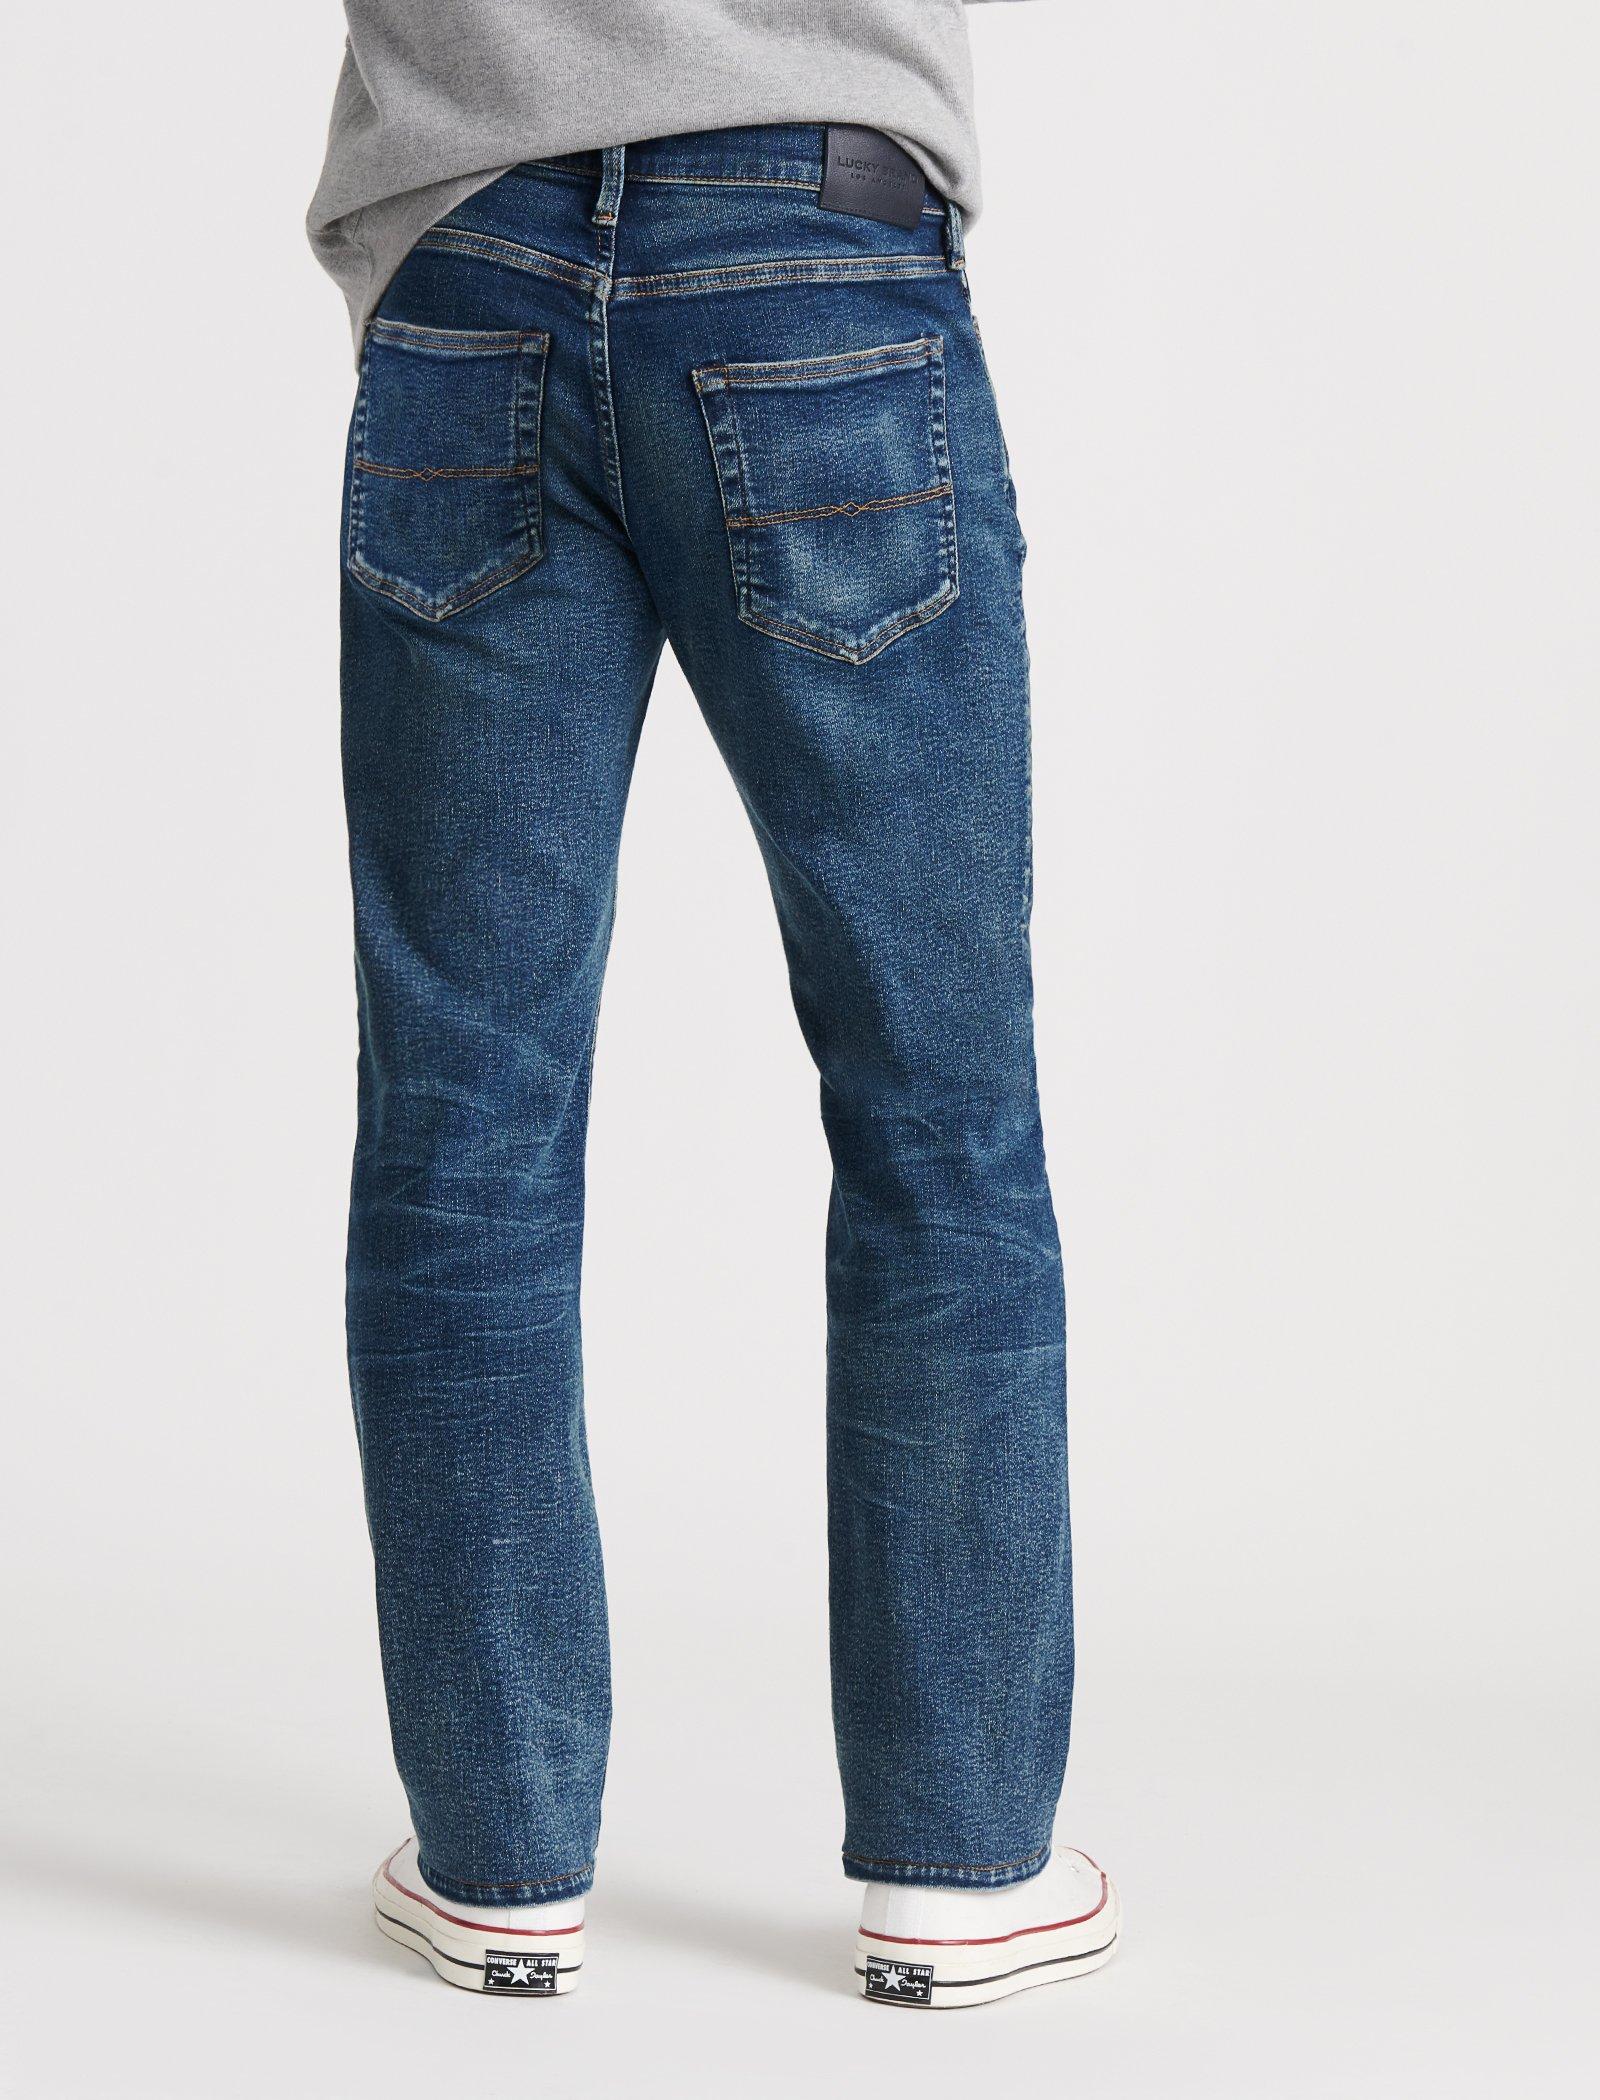 lucky you men's jeans